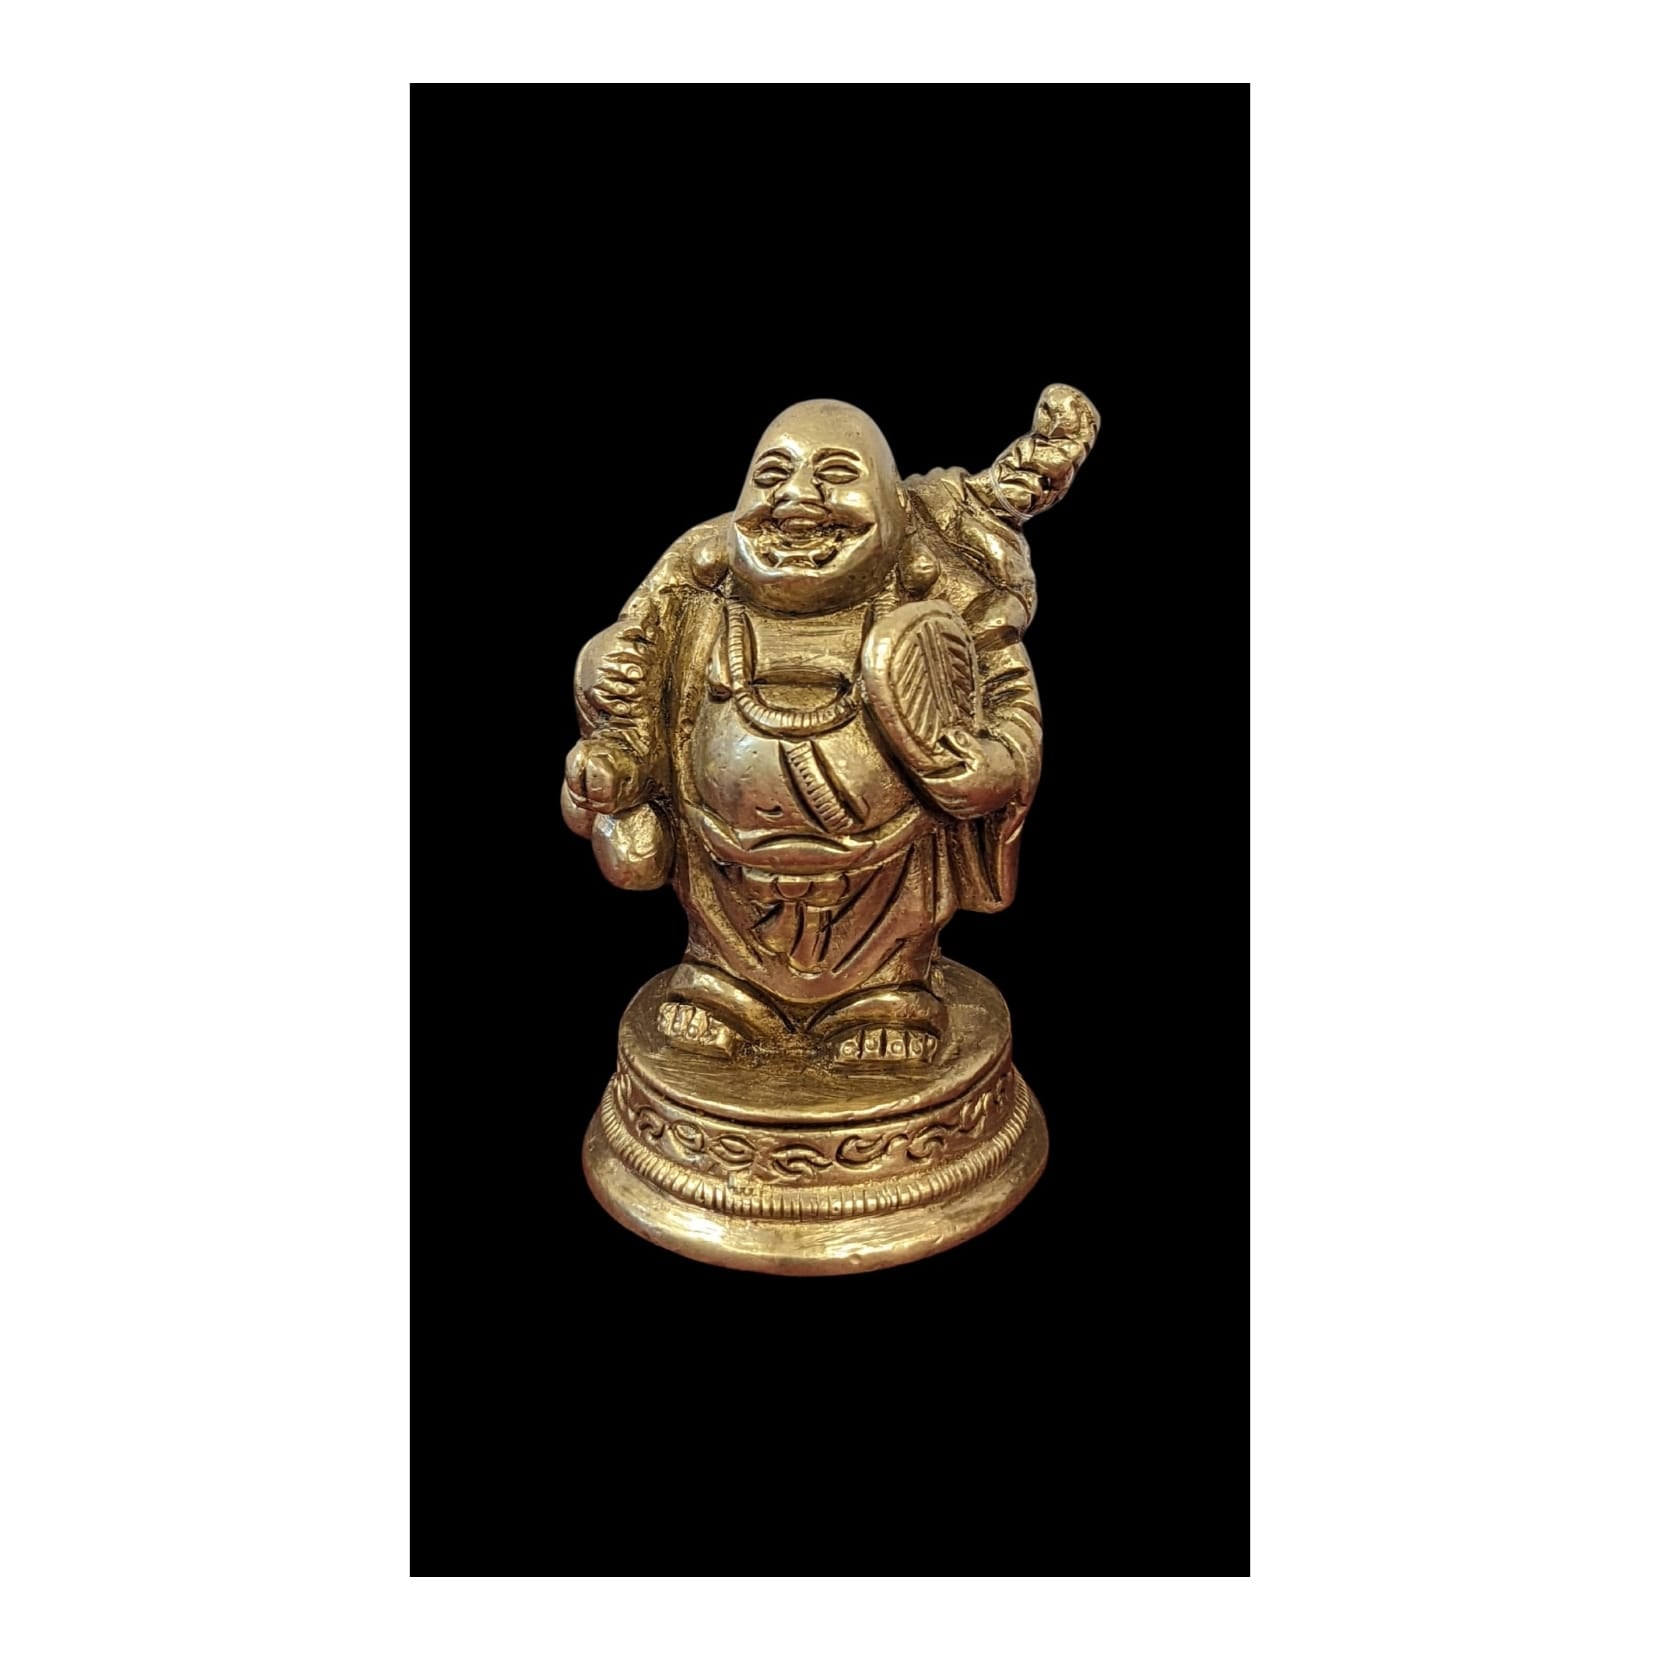 Indian Handmade Fine Inlaid Craft Brass Statue - Indian Traditional Musical  Instruments Playing - Shop inyatra - Kashmir Handmade Craft Items for  Display - Pinkoi